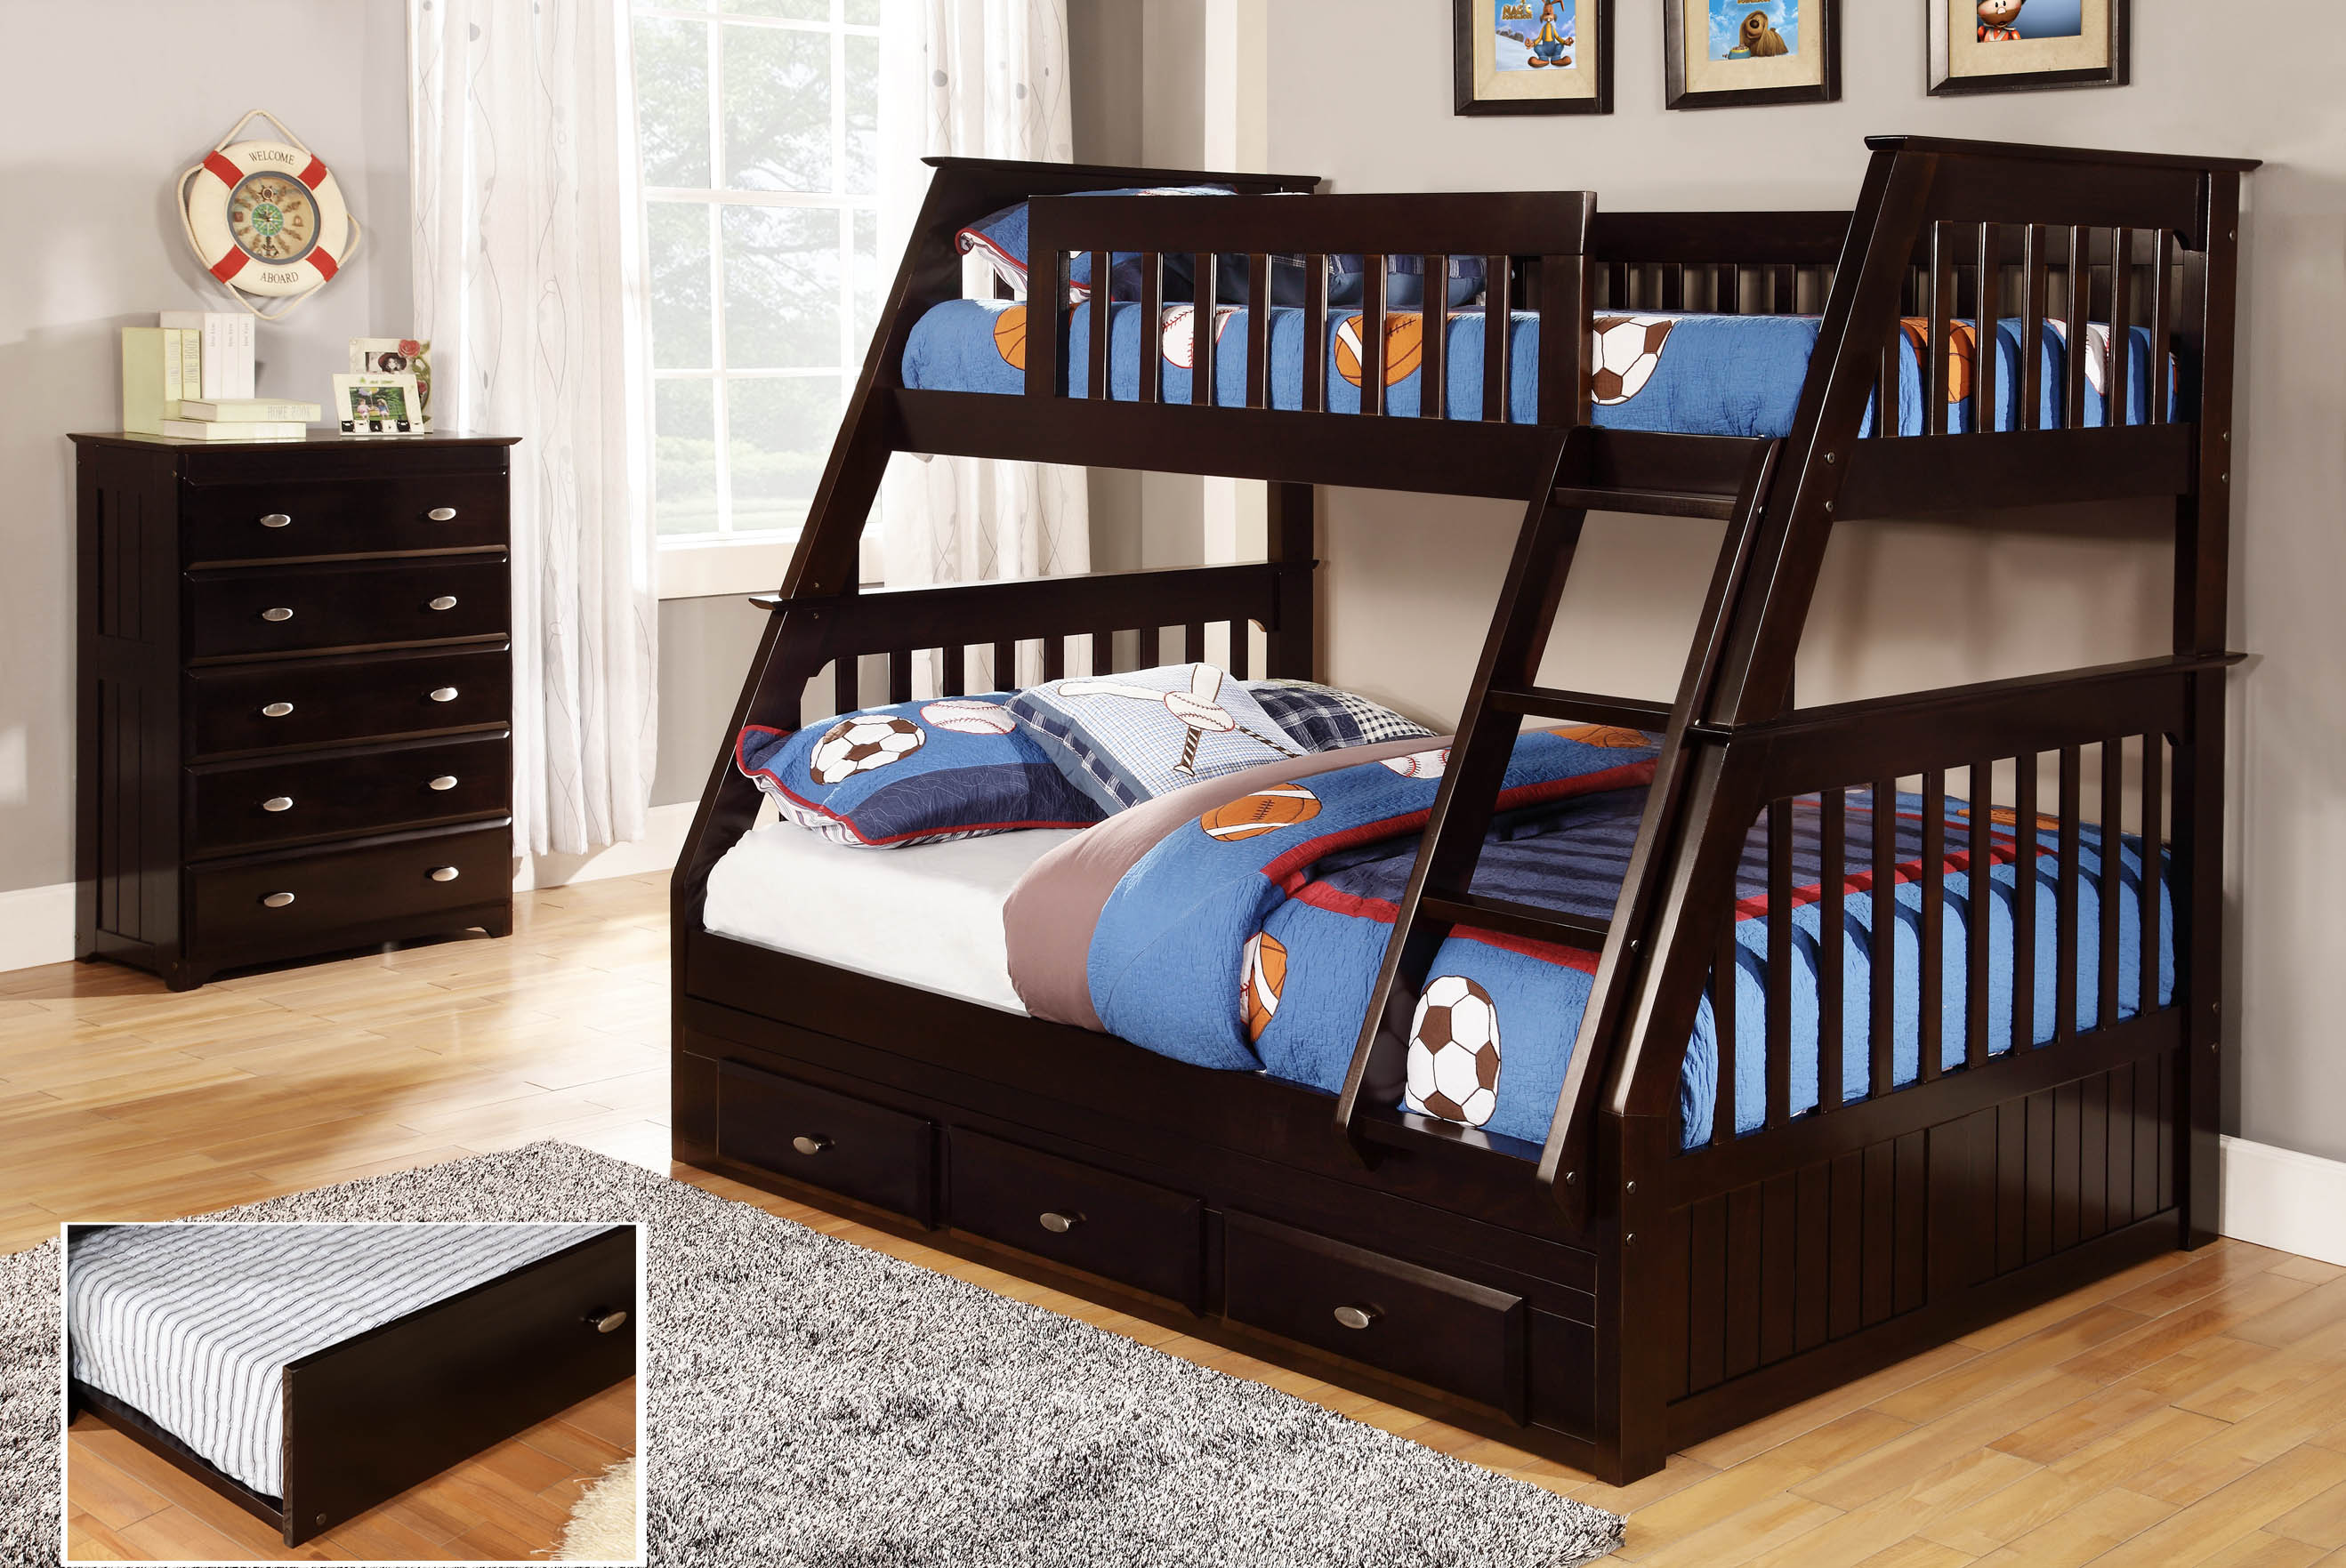 Espresso Mission Bunk Bed Kfs S, Discovery World Bunk Beds